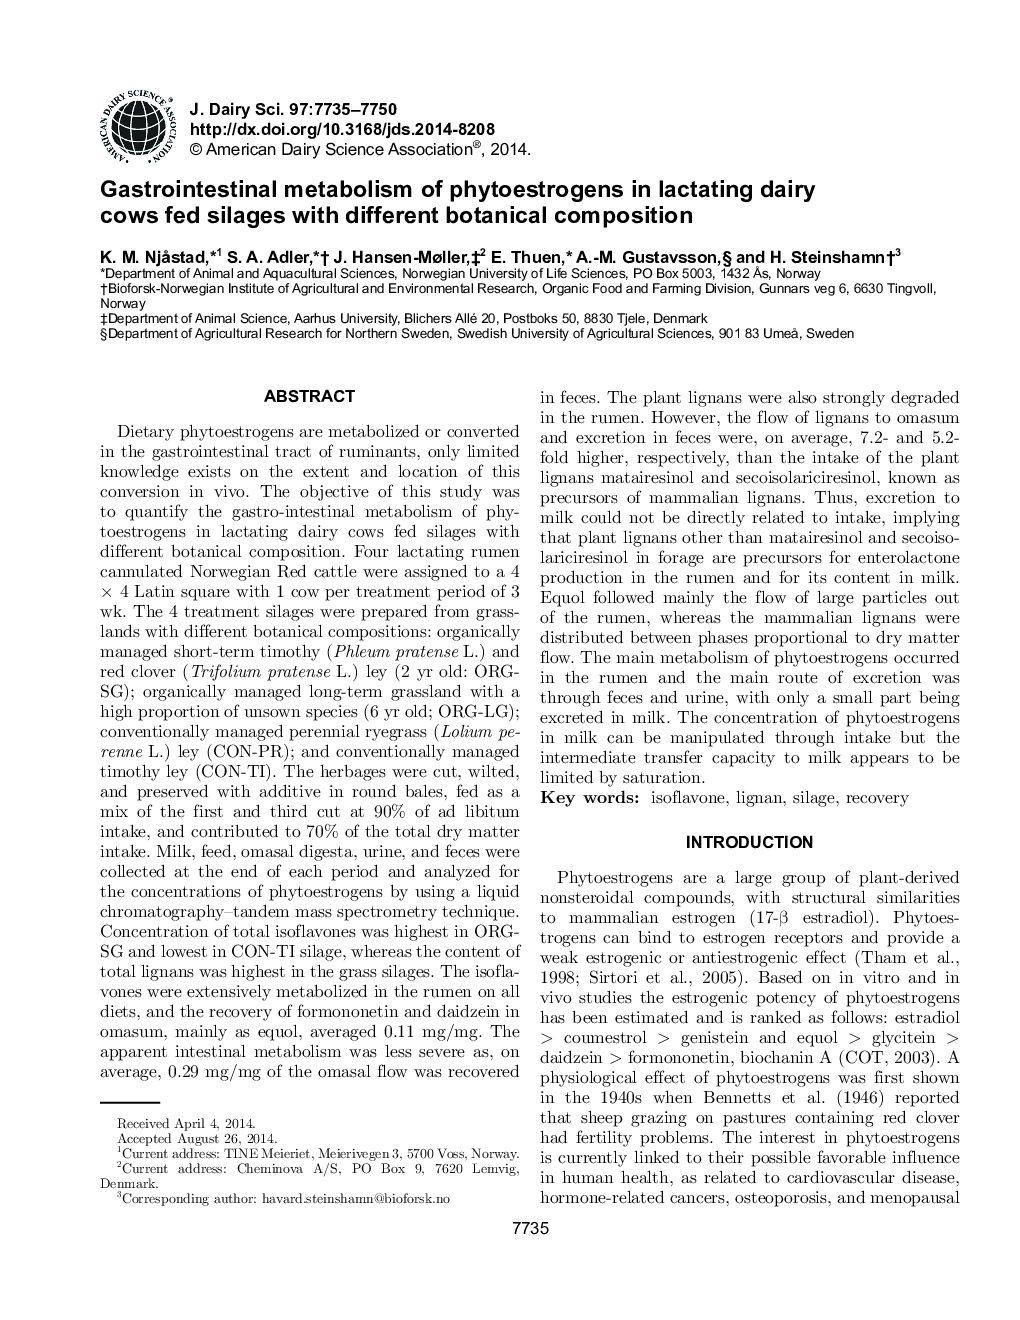 Gastrointestinal metabolism of phytoestrogens in lactating dairy cows fed silages with different botanical composition